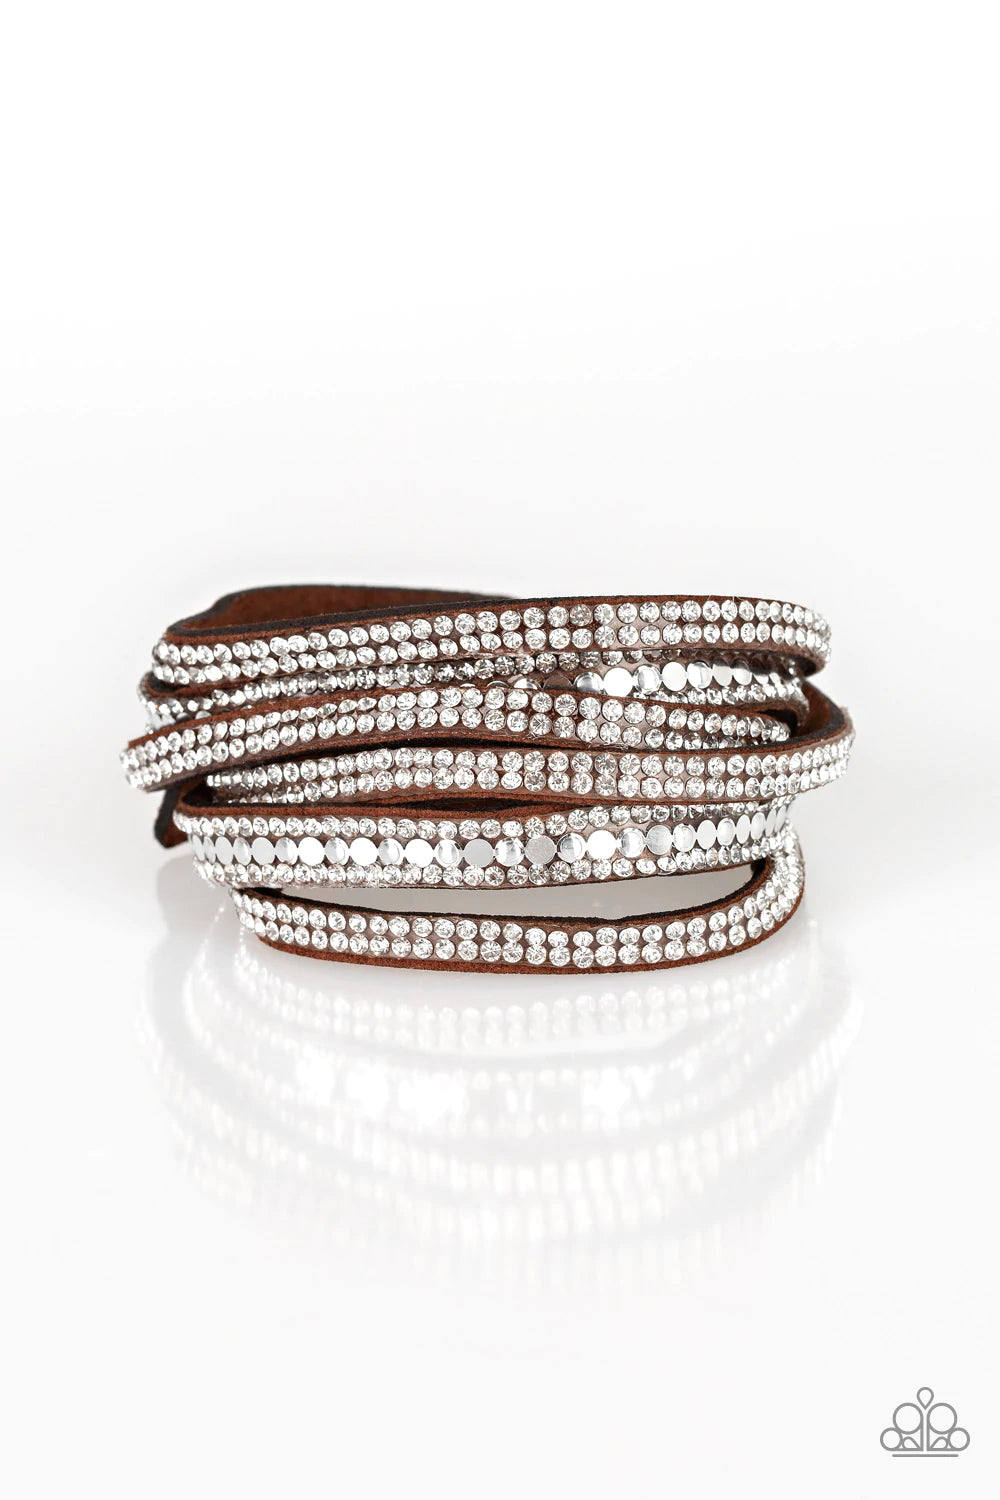 Paparazzi Accessories Rock Star Attitude - Brown Encrusted in rows of glassy white rhinestones and flat silver studs, three strands of brown suede wrap around the wrist for a sassy look. The elongated band allows for a trendy double wrap around the wrist.